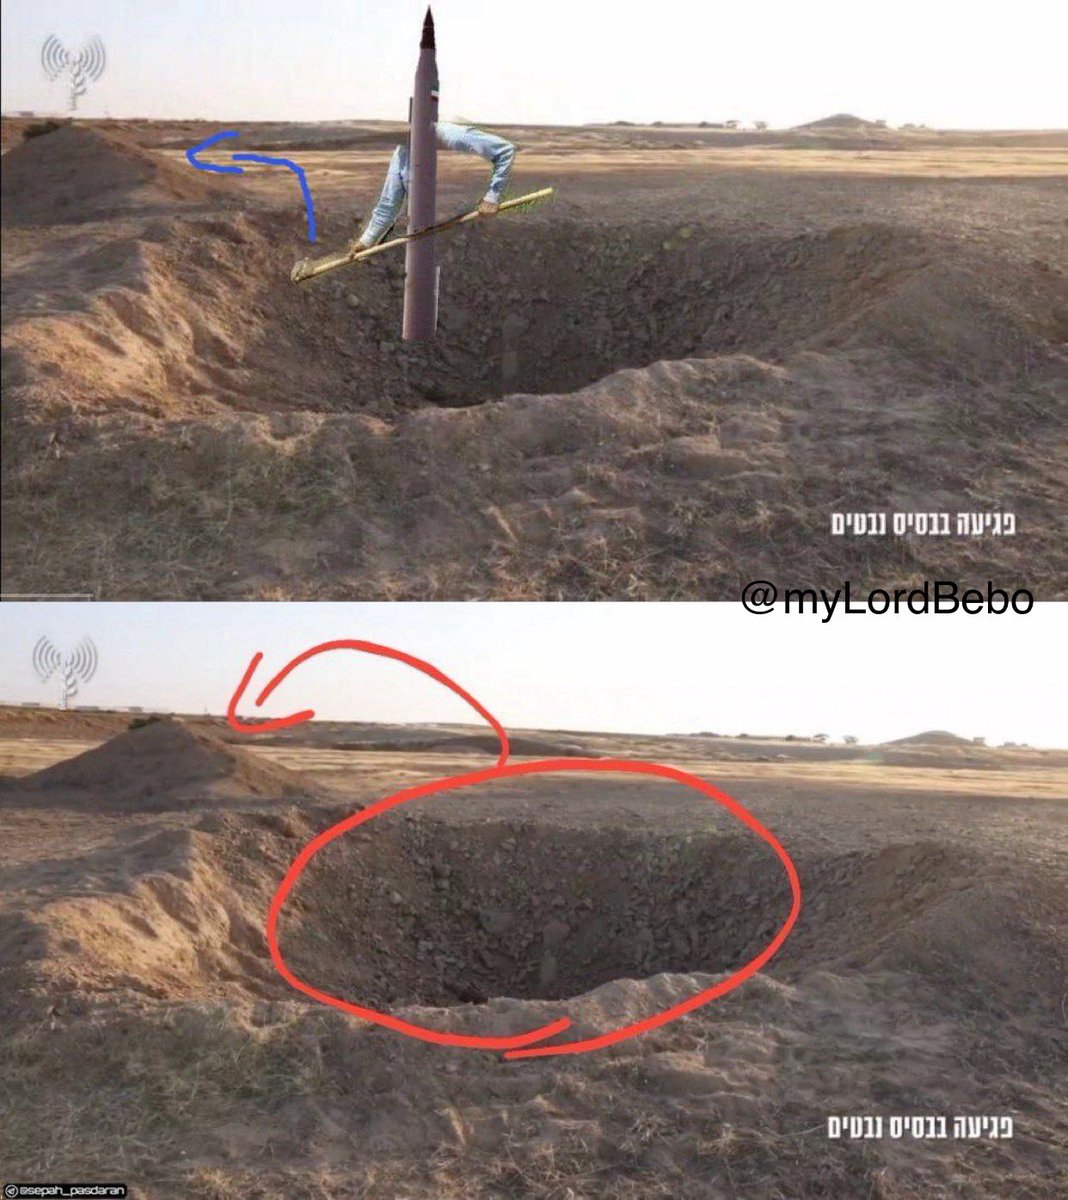 #BREAKING: Israel shows a clearly dug out hole instead of the real damage at the airbase hit by Iran! Now it looks like they’re faking it, to hide the real damage! WHAT ARE THEY HIDING?